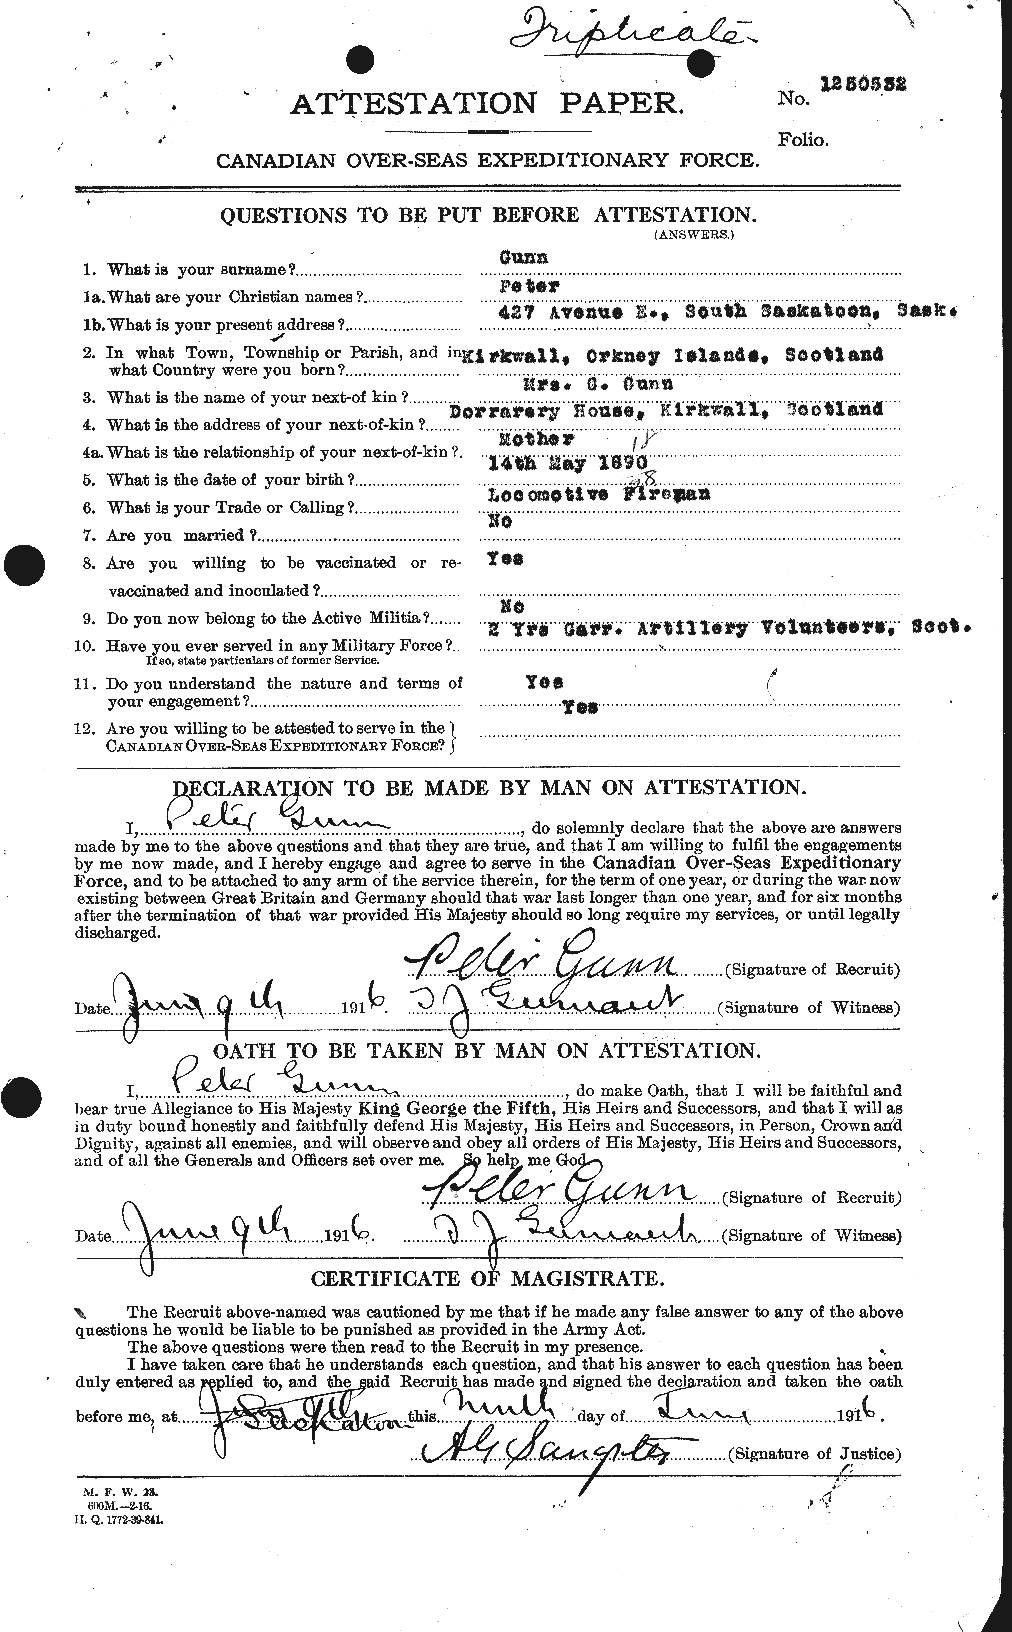 Personnel Records of the First World War - CEF 369319a